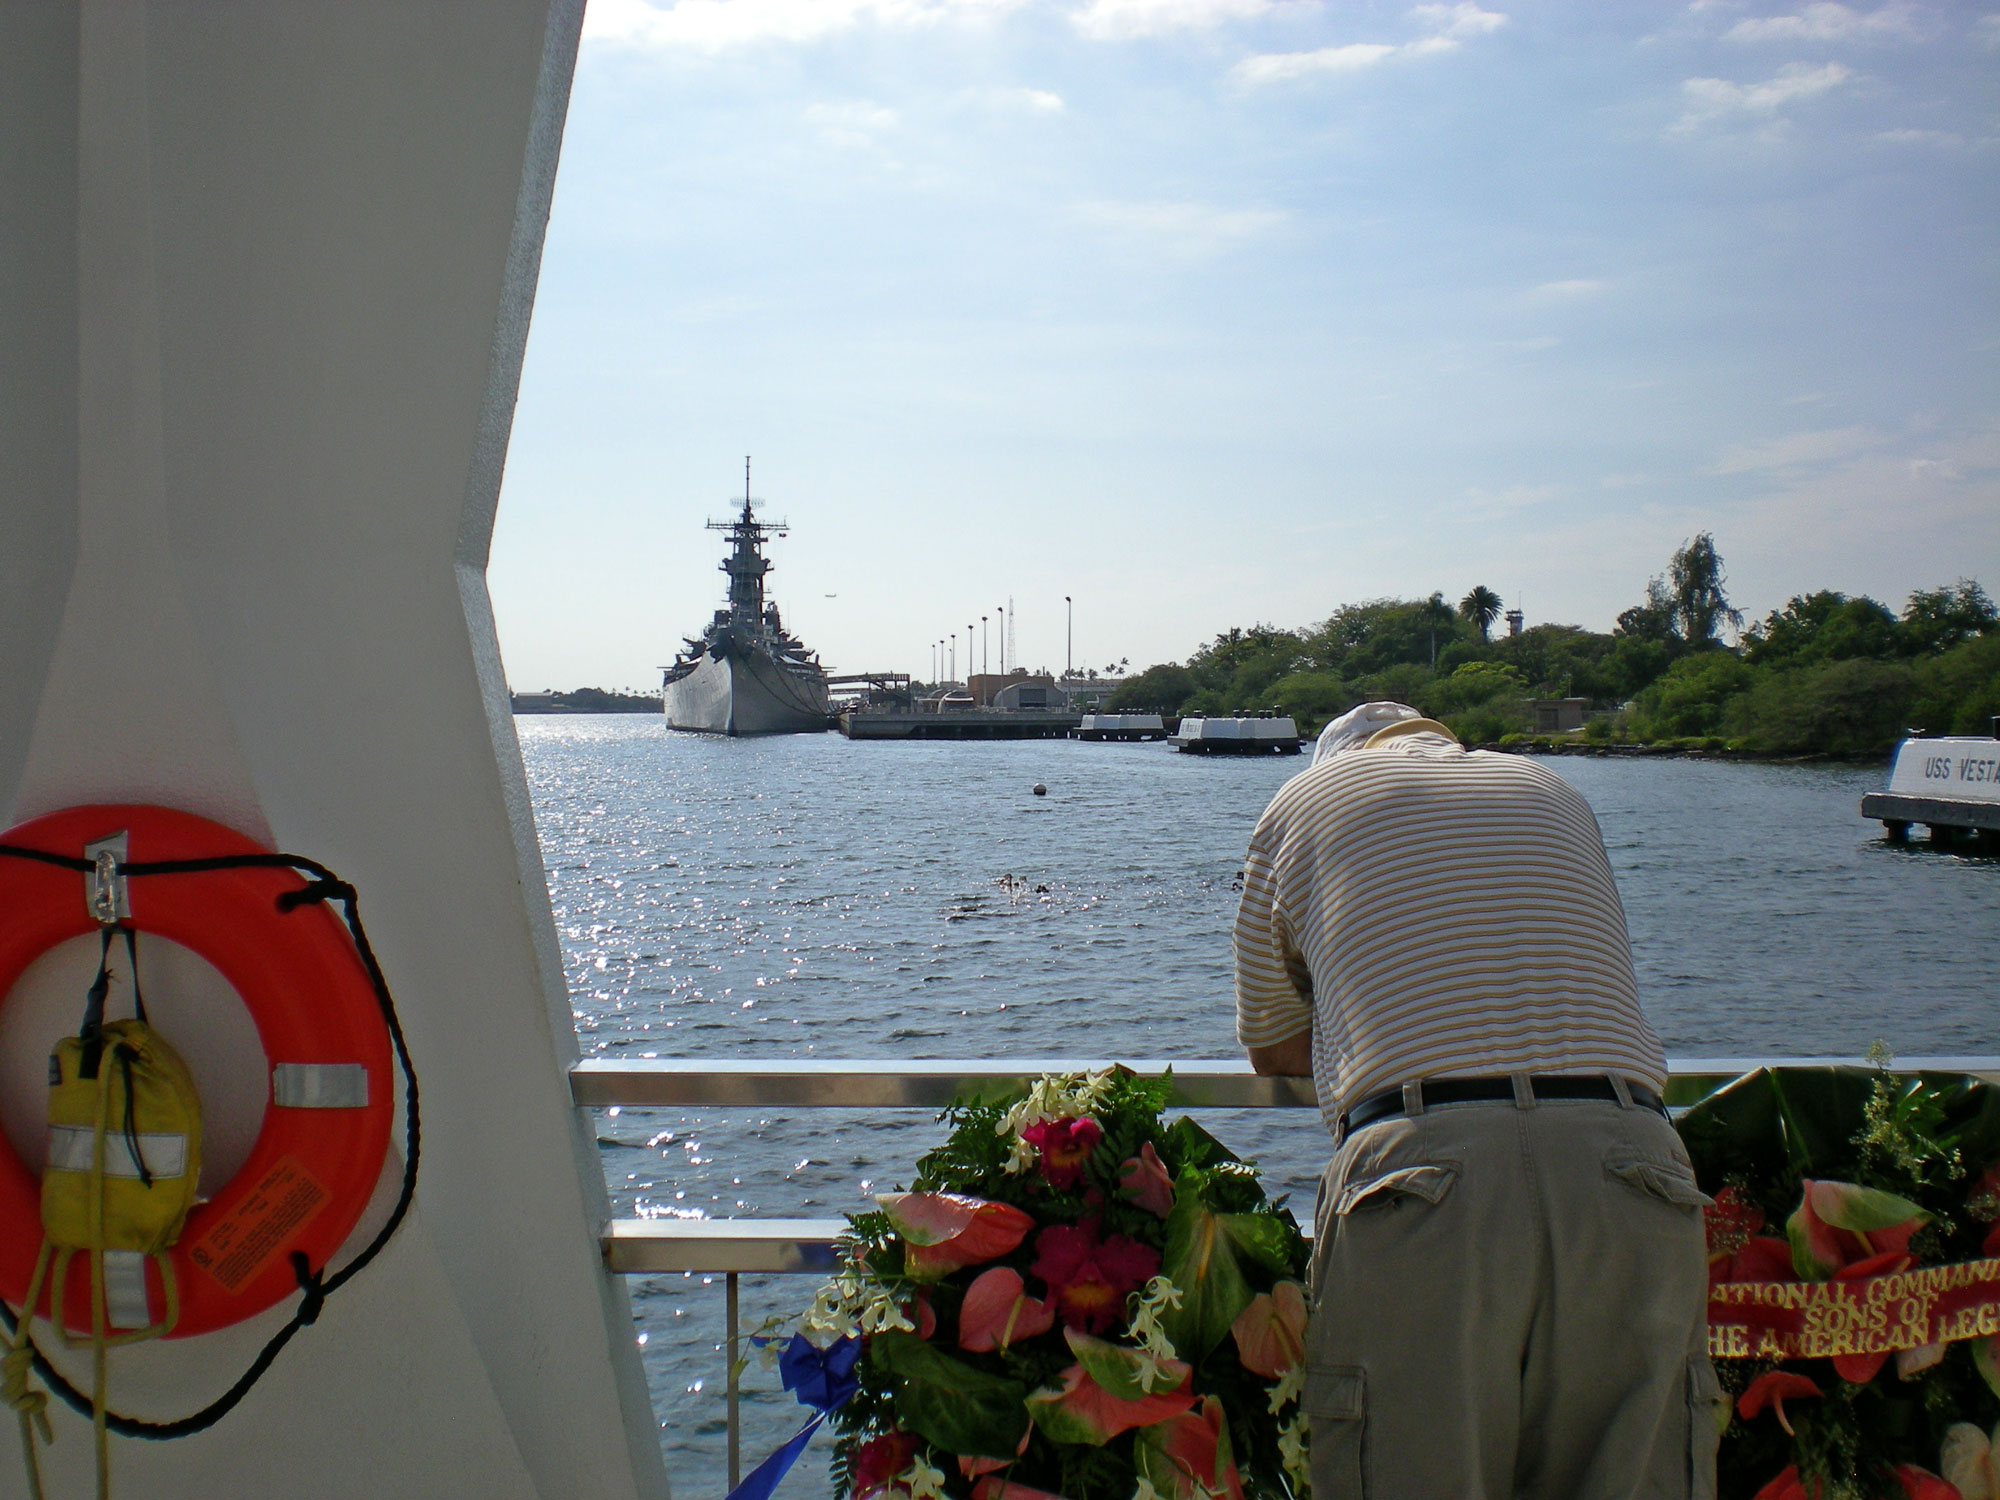 Man on boat in foreground hangs head in reverence to battleship and pearl harbor memorial in the background